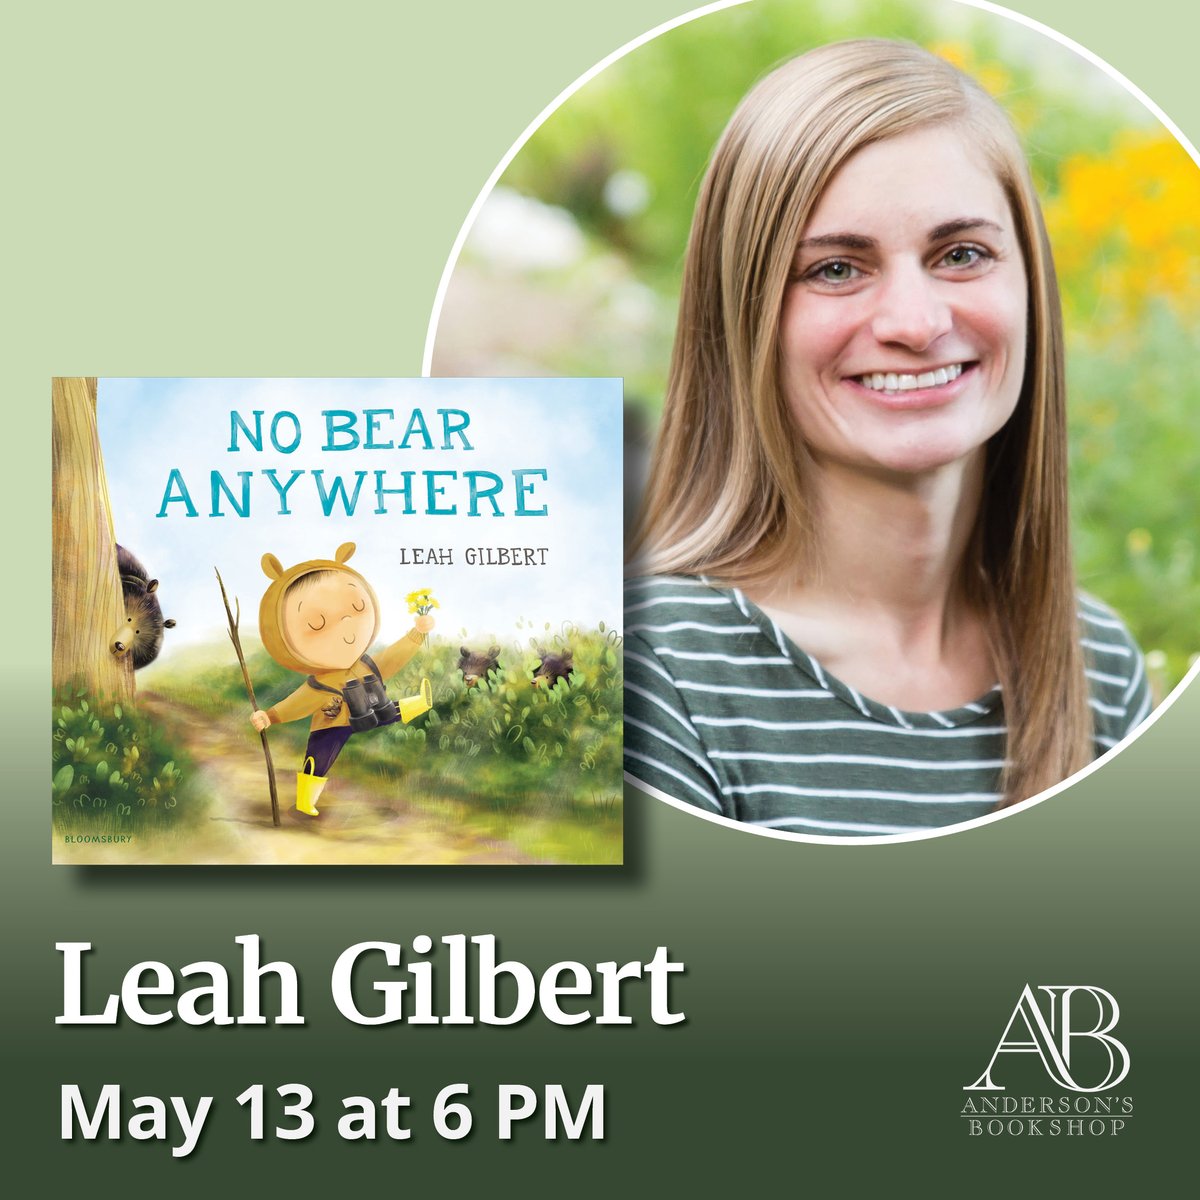 MAY 13: Brace yourself for the charm of No Bear Anywhere, when you meet Leah Gilbert @lalaleeeah in our Downers Grove store! We love this book, so bring your favorite little for a storytime, quick presentation, Q&A & singing line! MULTIPLE TICKET OPTIONS: LeahGilbertAndersons.eventcombo.com